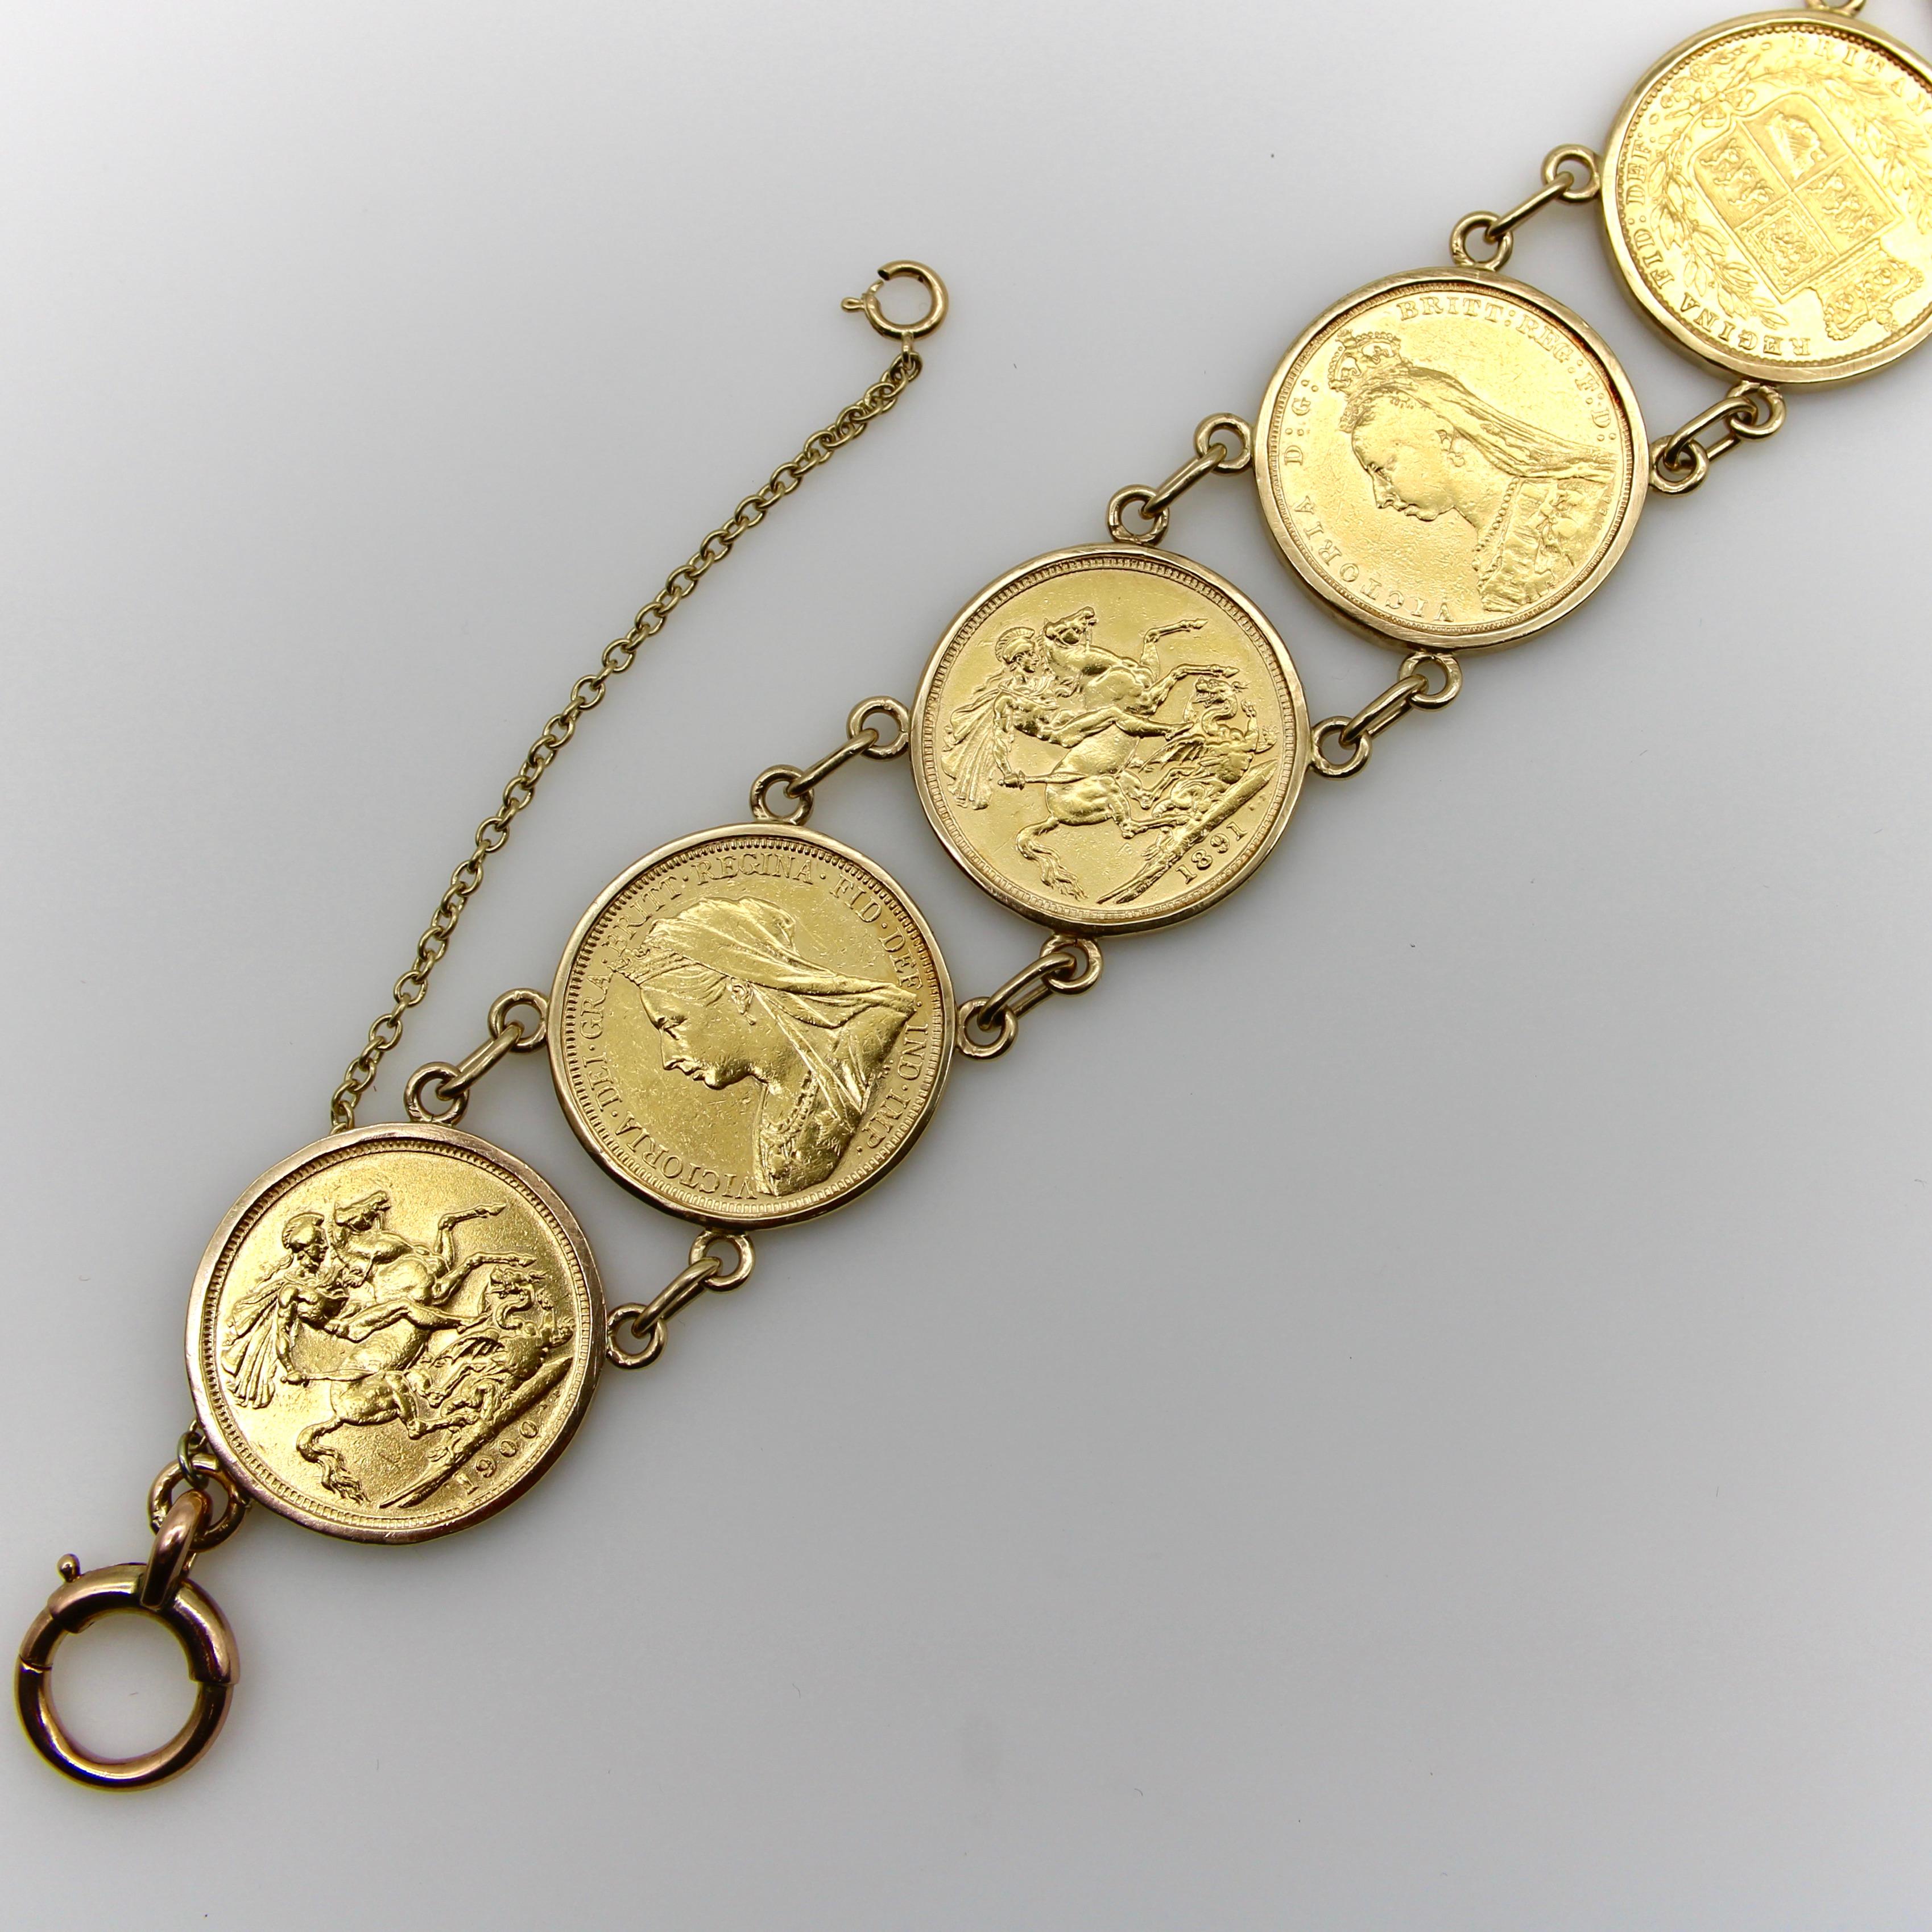 Victorian Queen Victoria  22K Gold British Sovereigns Coin Bracelet In Good Condition For Sale In Venice, CA